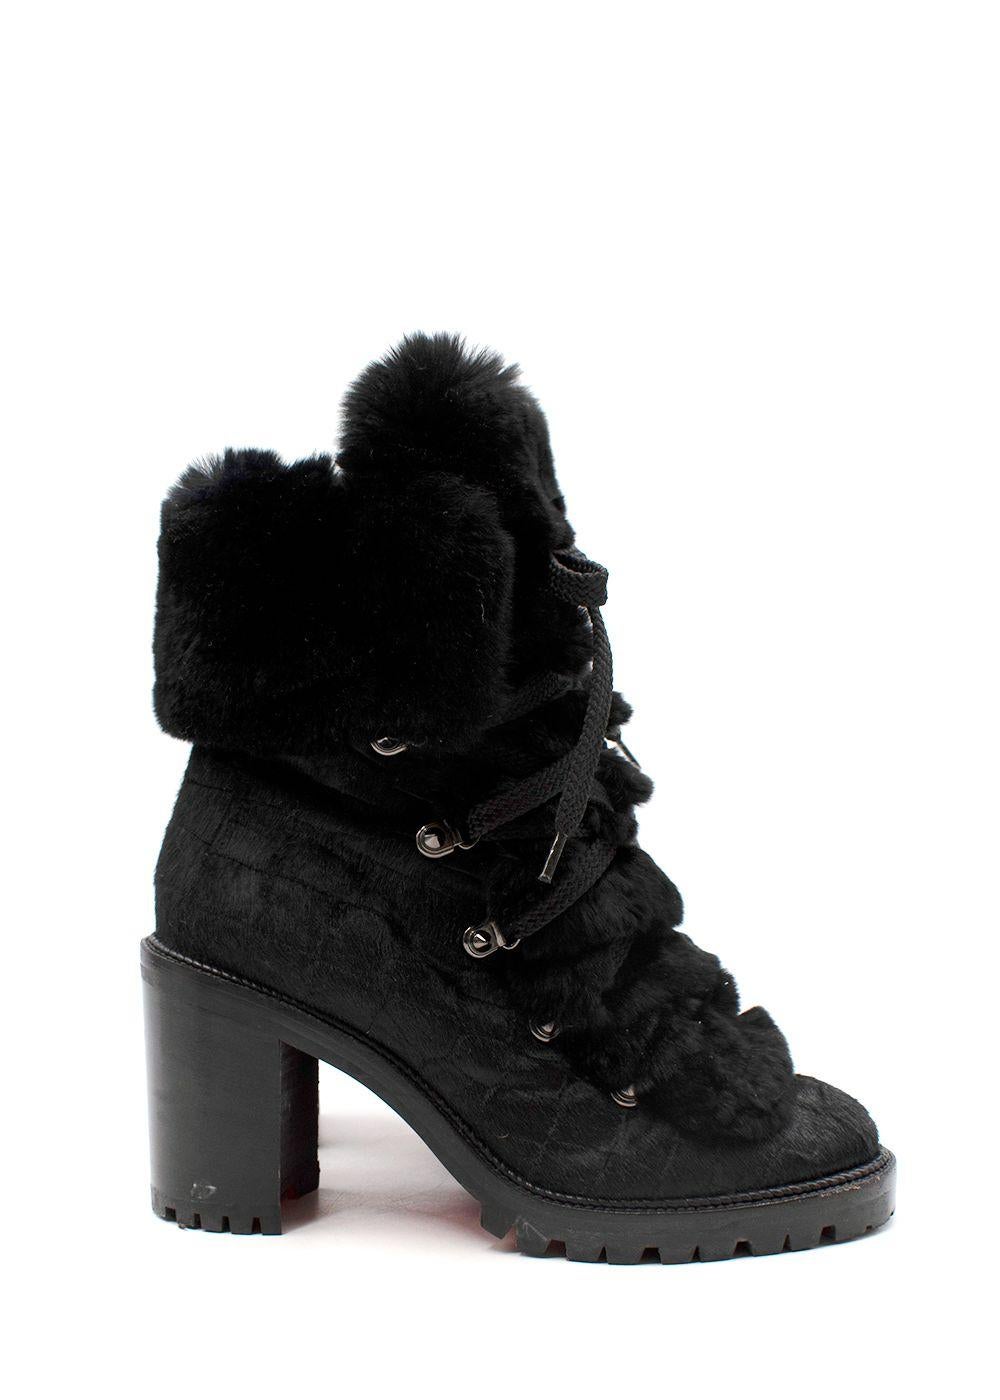 Christian Louboutin Black Pony Skin & Rabbit Fur Fanny Heeled Biker Boots

- Biker-style boots rendered in textured pony skin, with a soft rabbit fur ankle cuff
- Lace-up front
- Set on a sturdy rubber sole and block heel with cleated tread

Pony